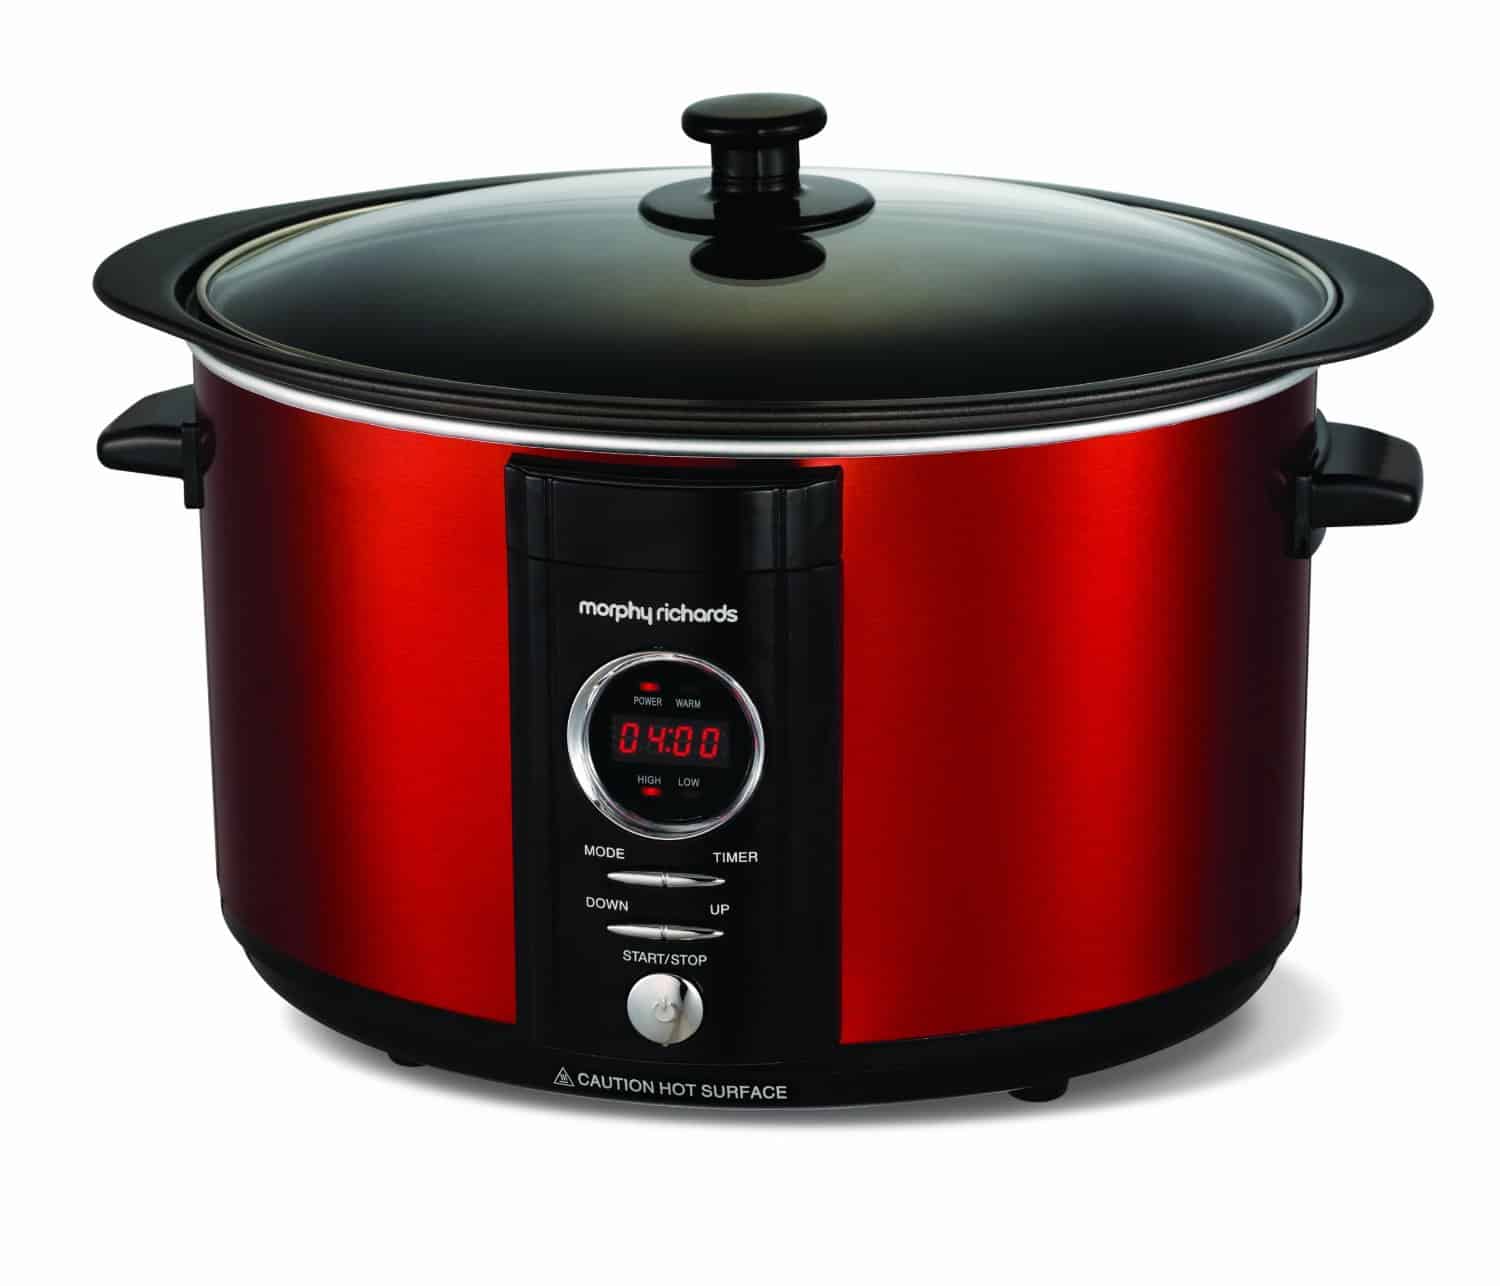 Morphy Richards Sear and Stew Digital